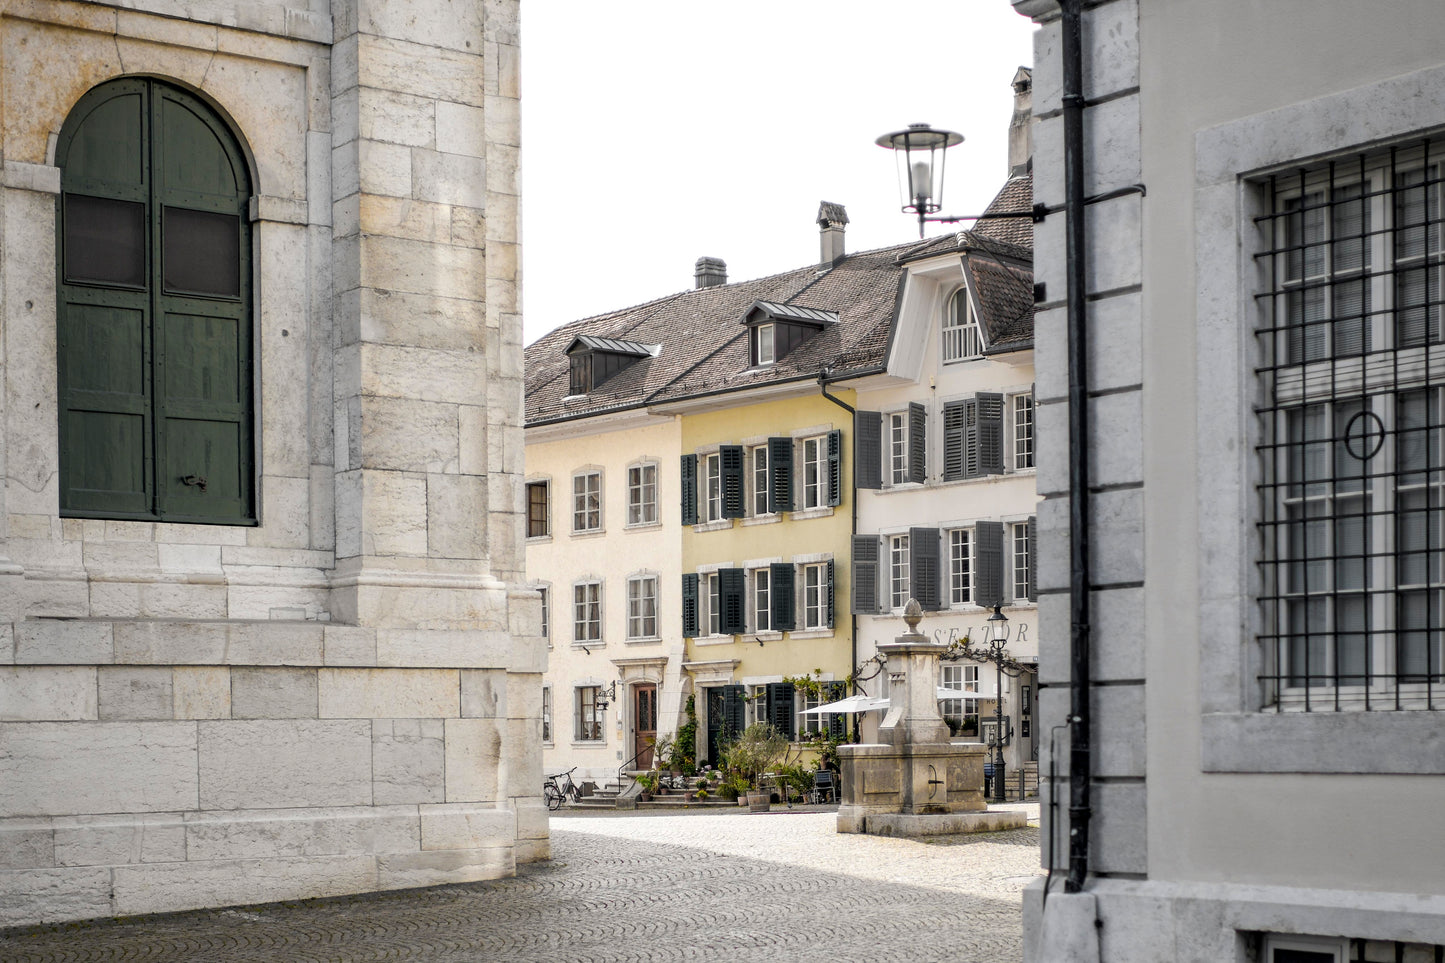 SOLOTHURN